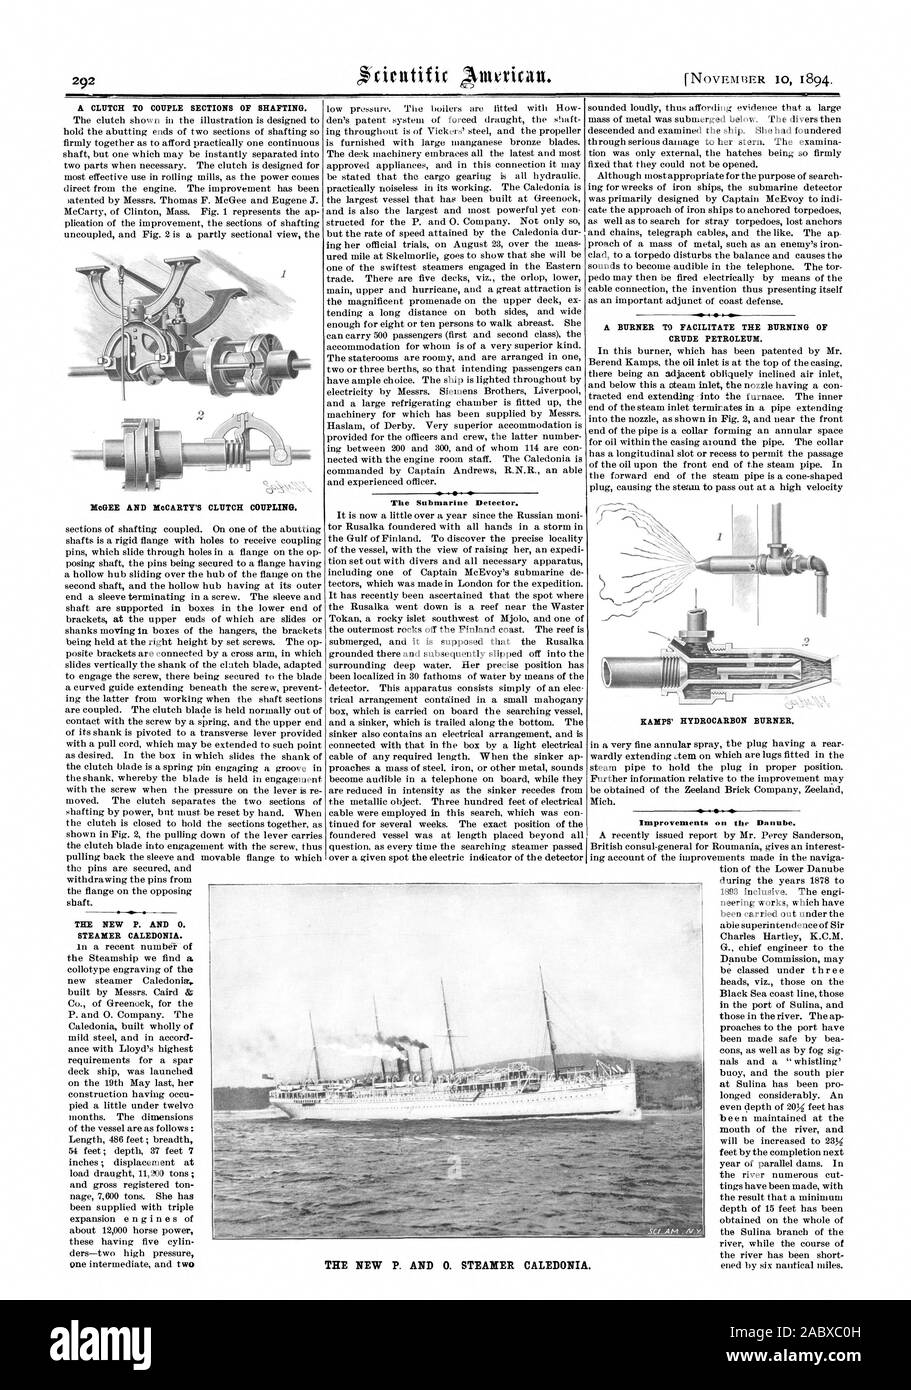 A CLUTCH TO COUPLE SECTIONS OF SHAFTING. bleGEE AND MeCARTY'S CLUTCH COUPLING. The Submarine Detector. CRUDE PETROLEUM. RAMPS' HYDROCARBON BURNER. THE NEW P. AND 0. STEAMER CALEDONIA., scientific american, 1894-11-10 Stock Photo